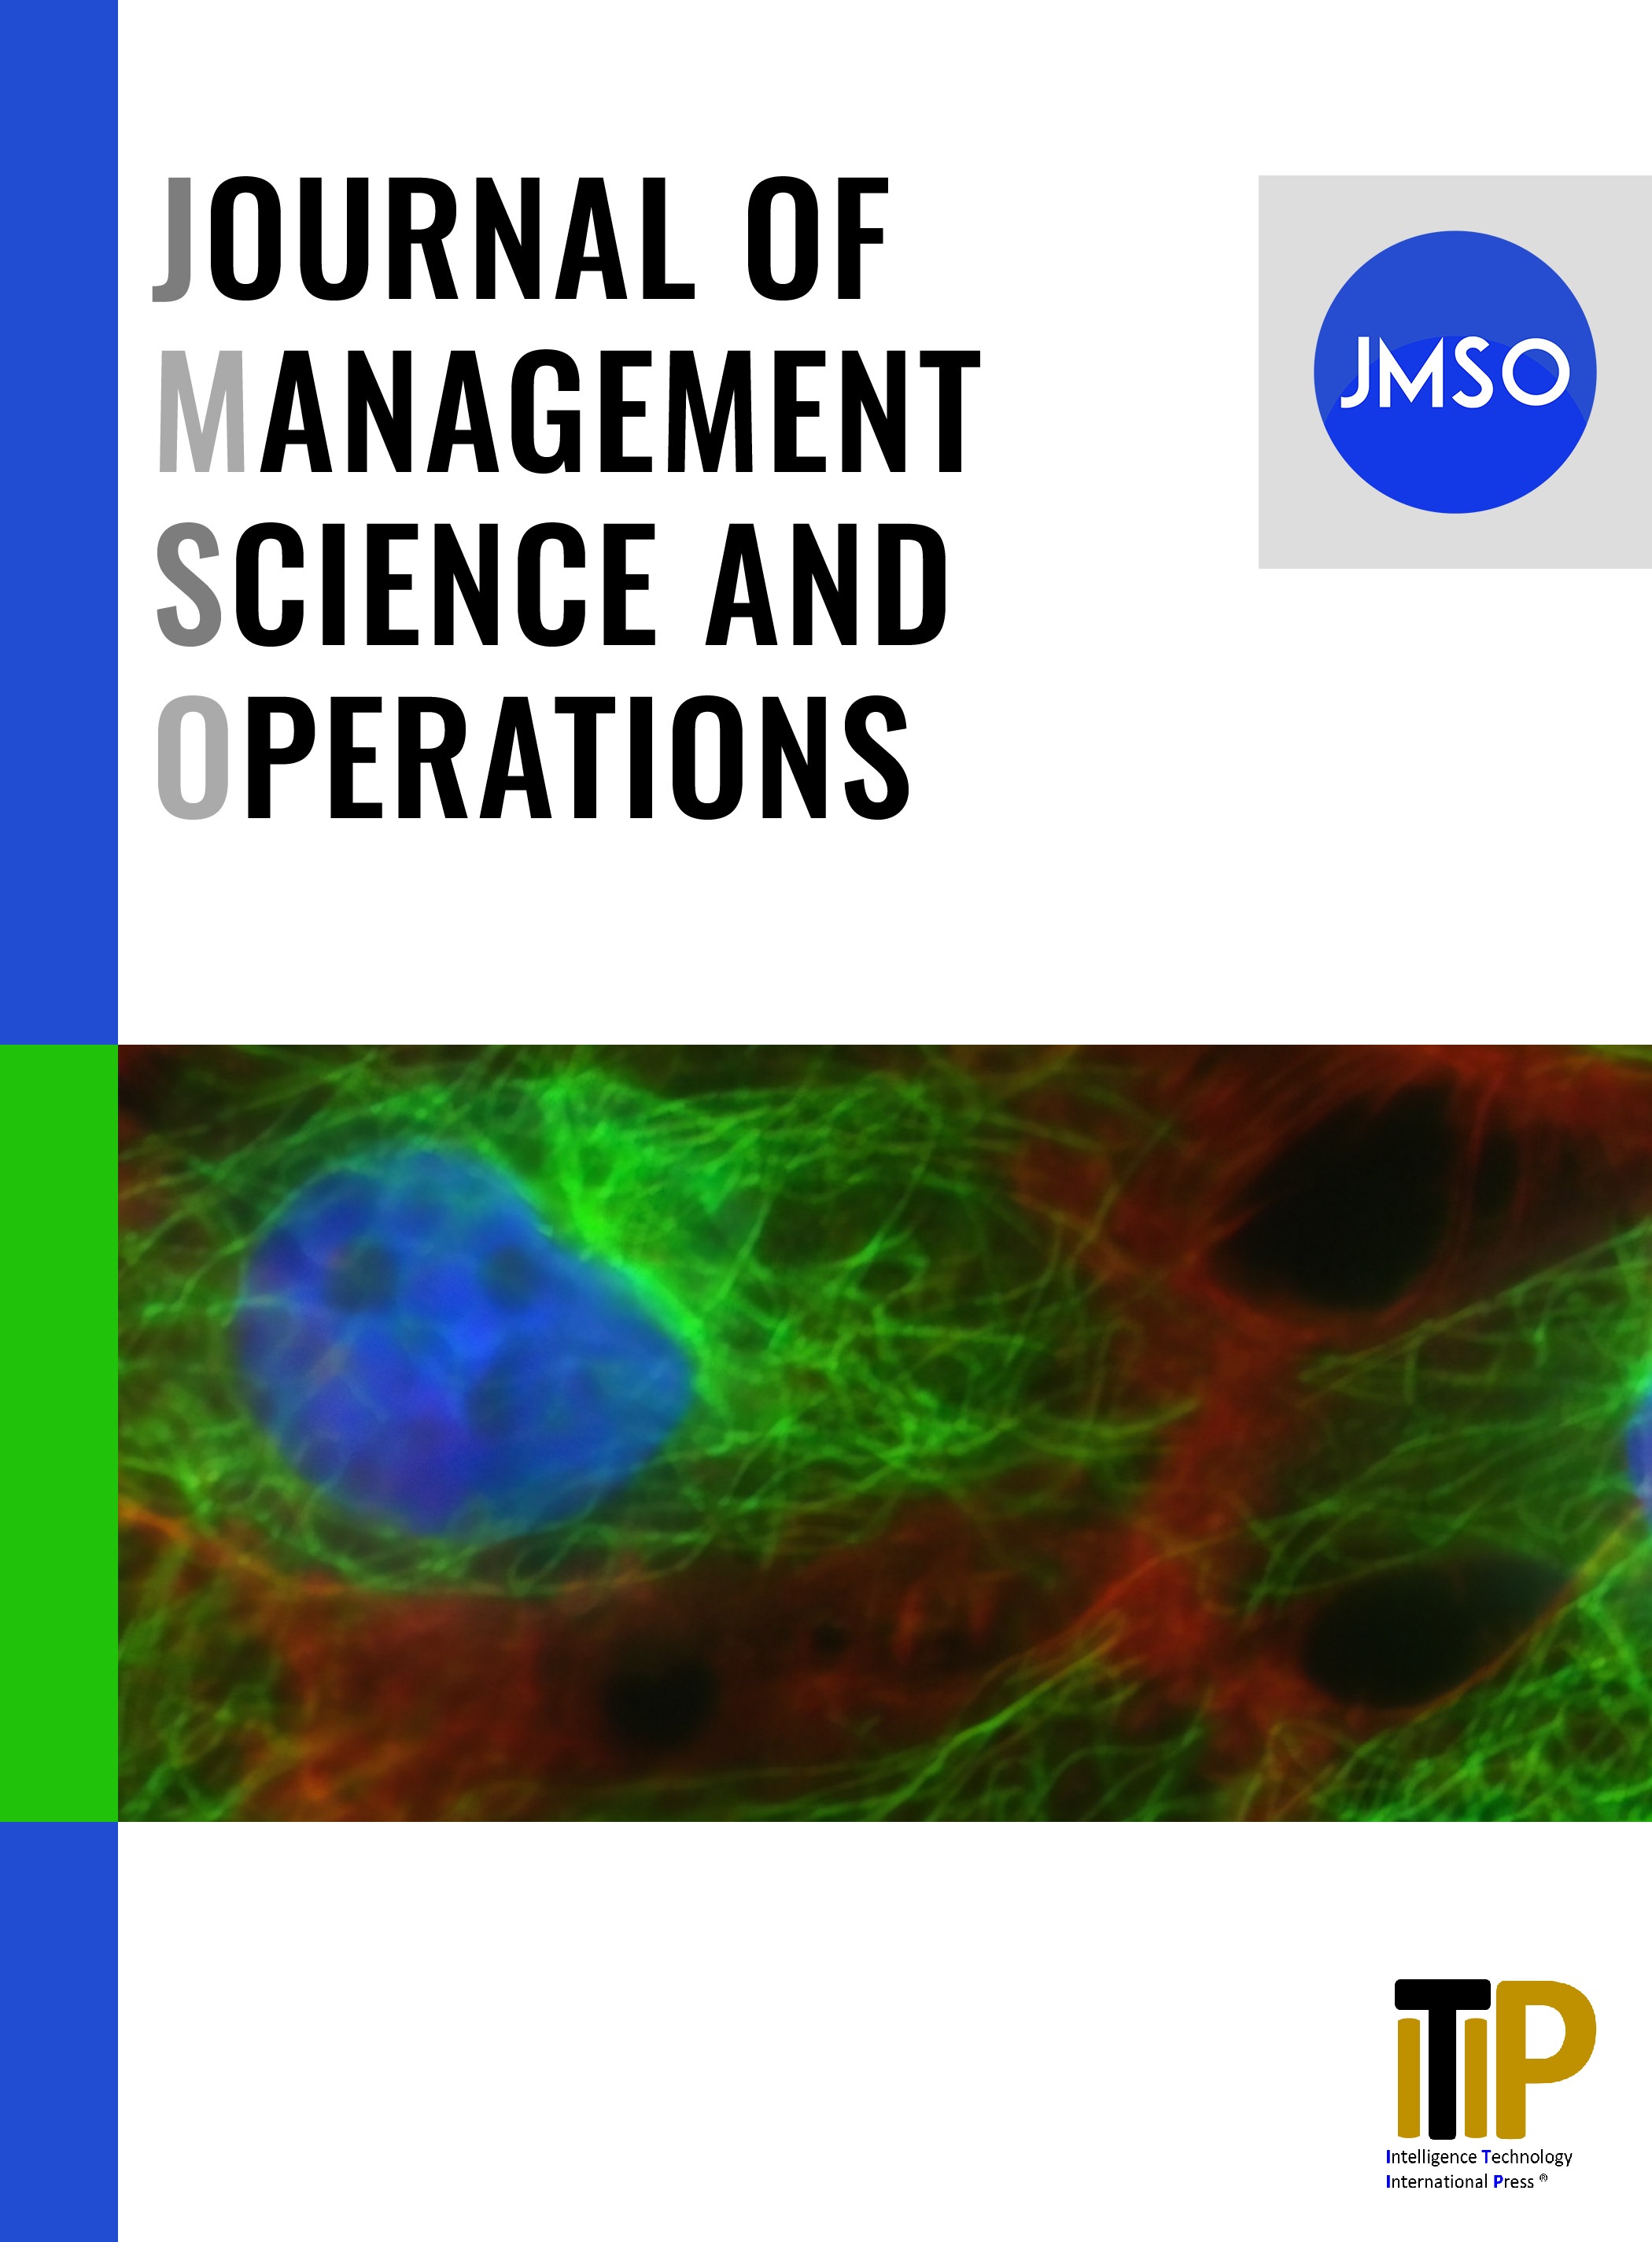 Journal of Management Science and Operations